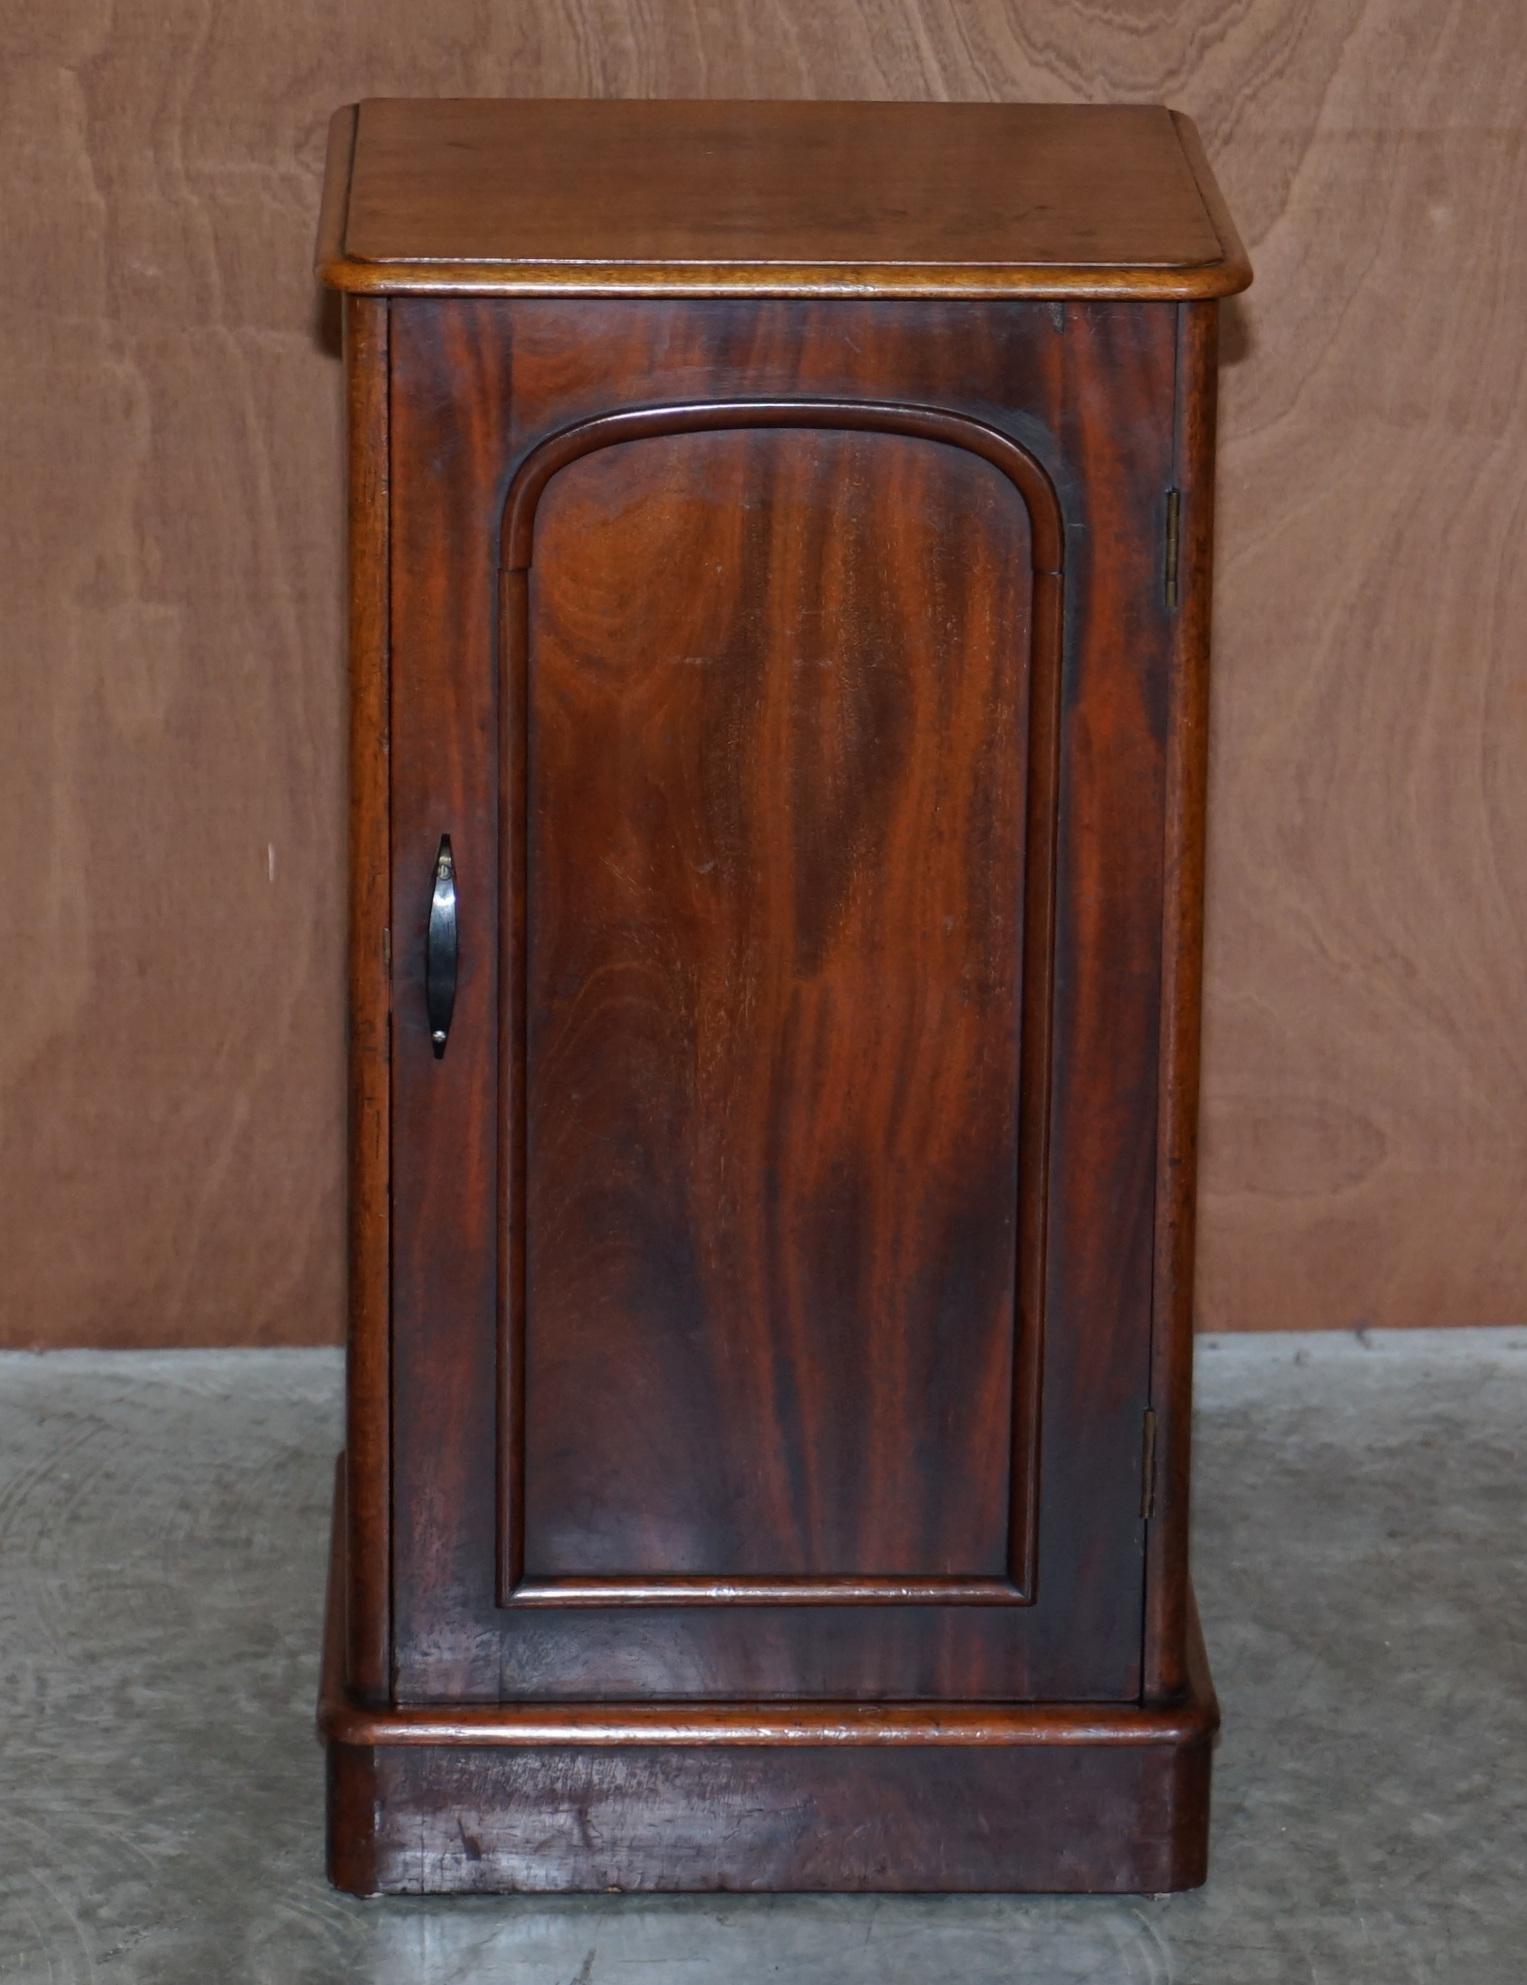 We are delighted to offer for sale this lovely Victorian flamed mahogany side table sized pot cupboard

A very utilitarian and well made piece. I have seen these used as bedside tables, jardinière stands for plants and antiques or lamp / wine